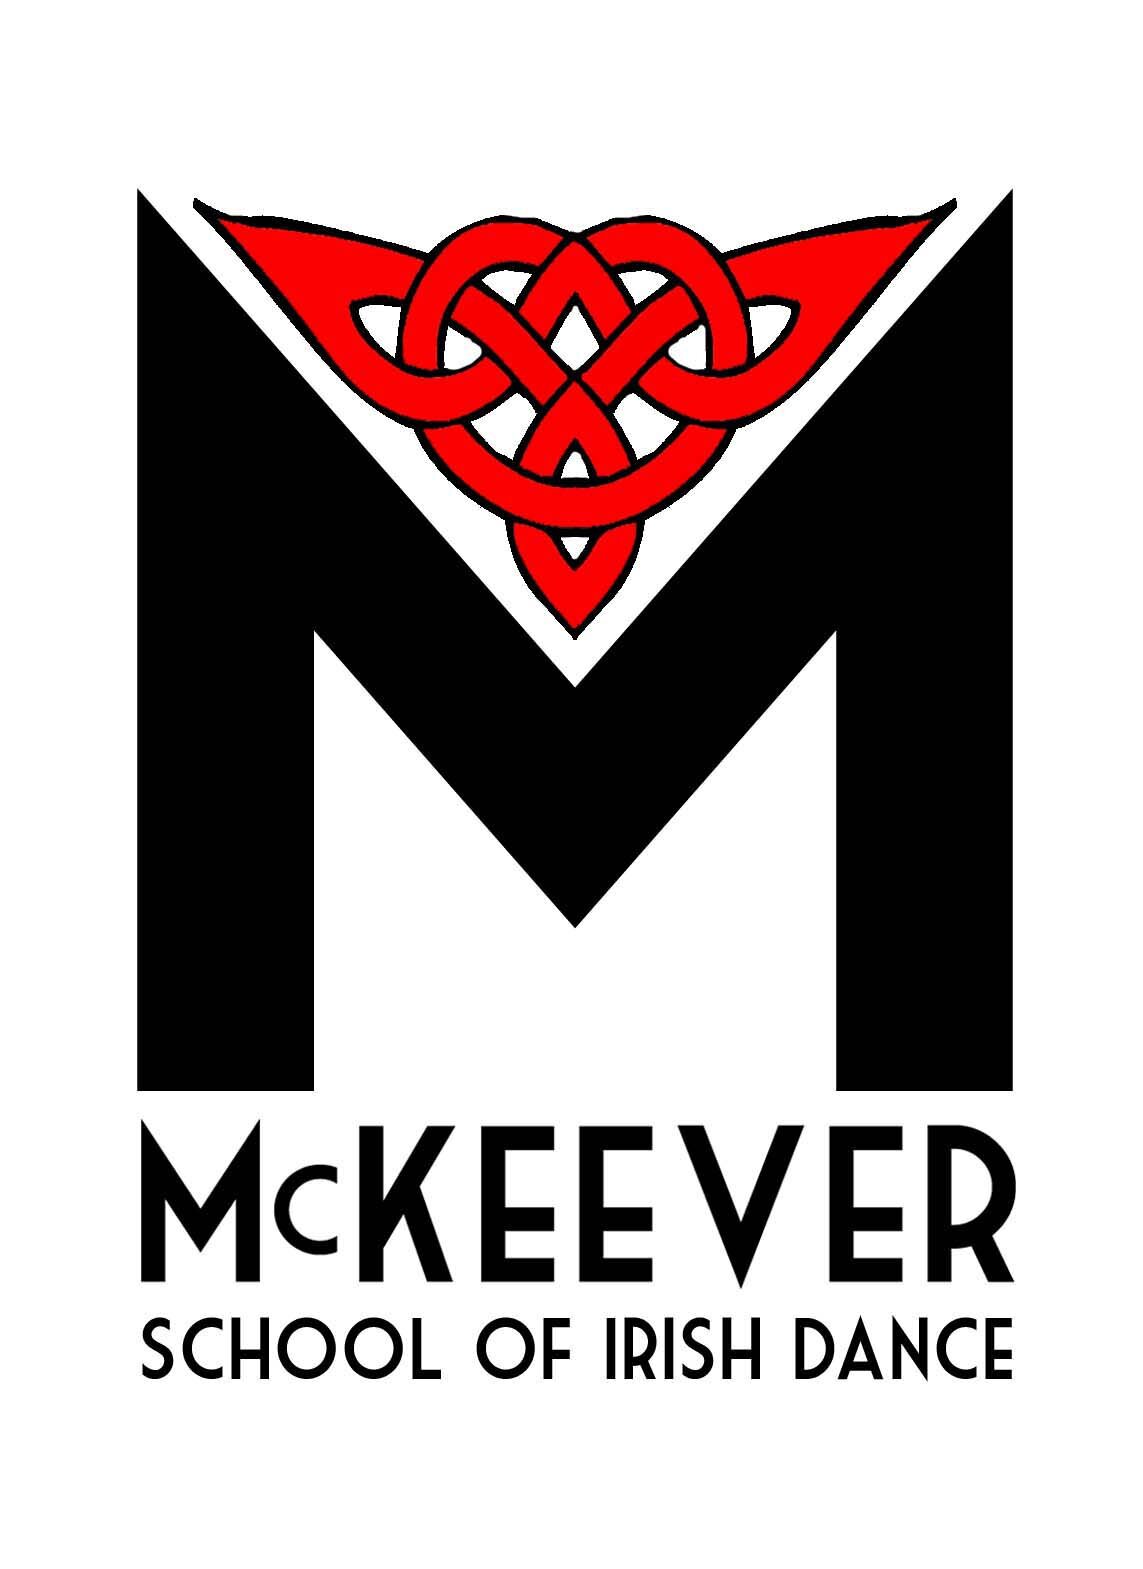 McKeever School of Irish Dance, Sacramento, California. Owned and operated by Nicole McKeever TCRG and professional Irish Dancer with Riverdance and Ragus.